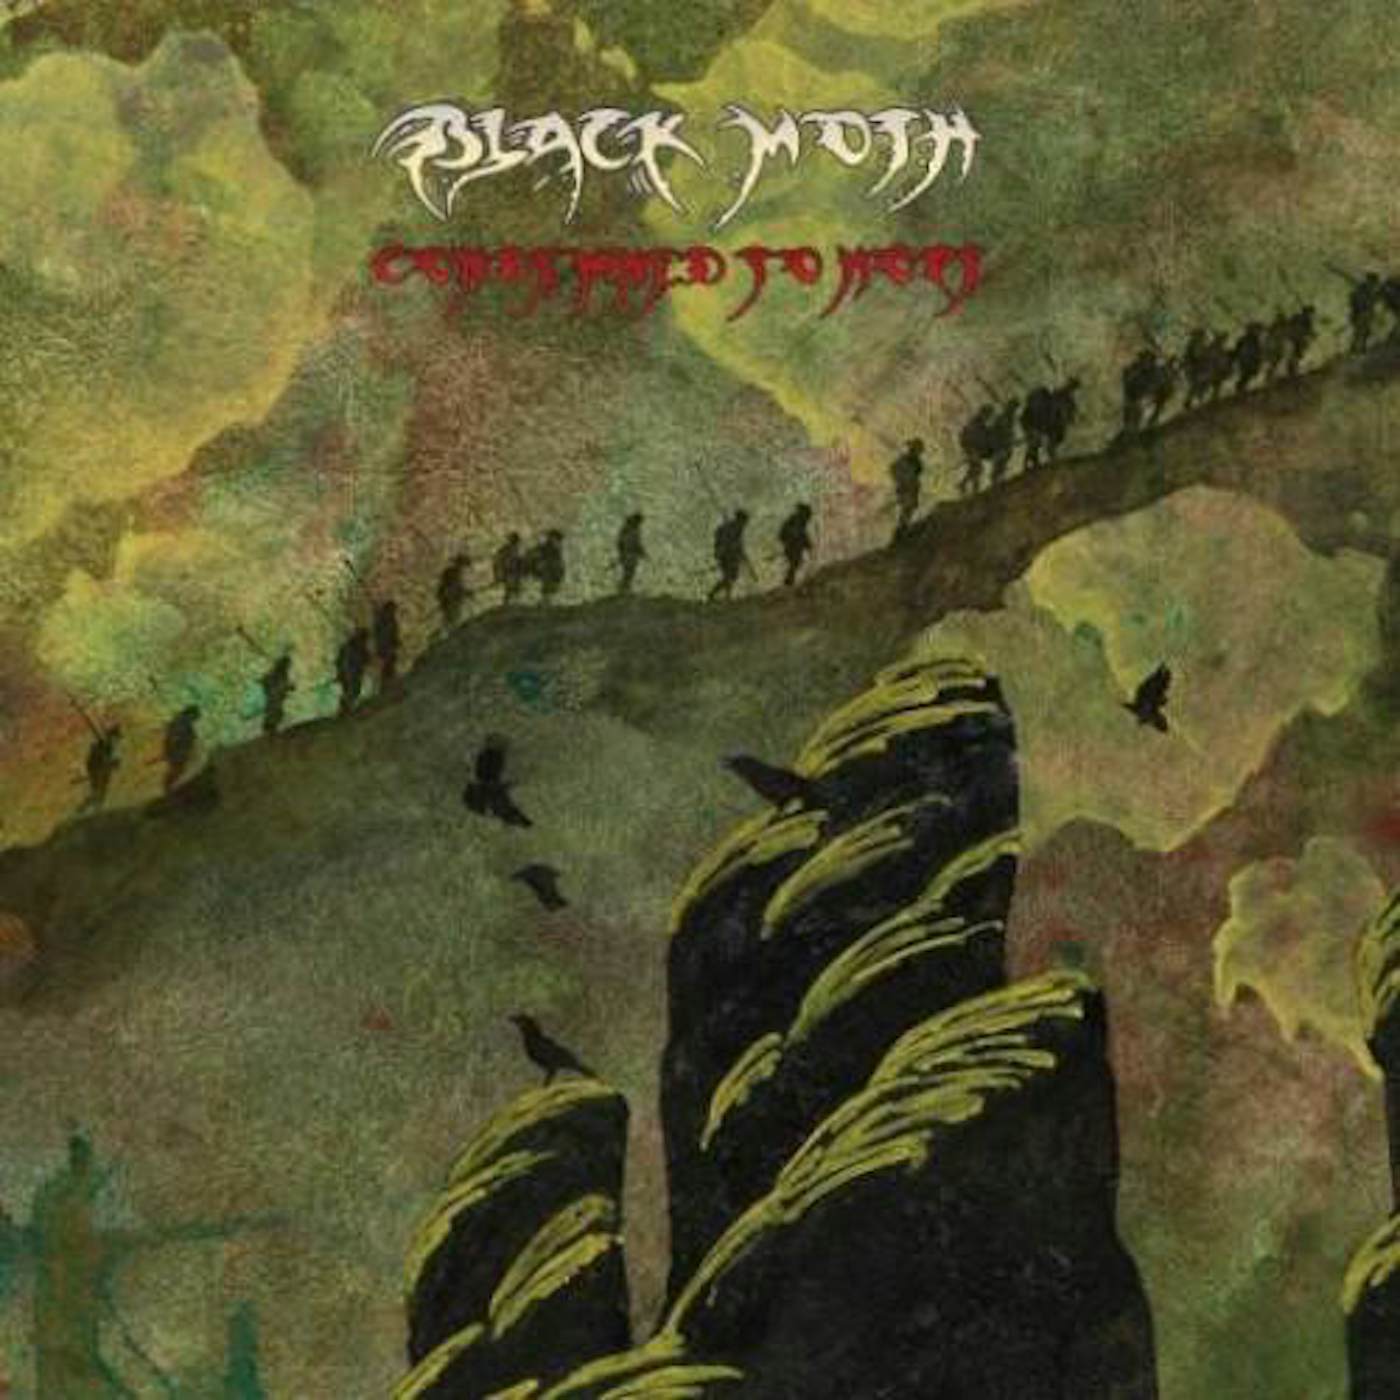 Black Moth Condemned To Hope Vinyl Record